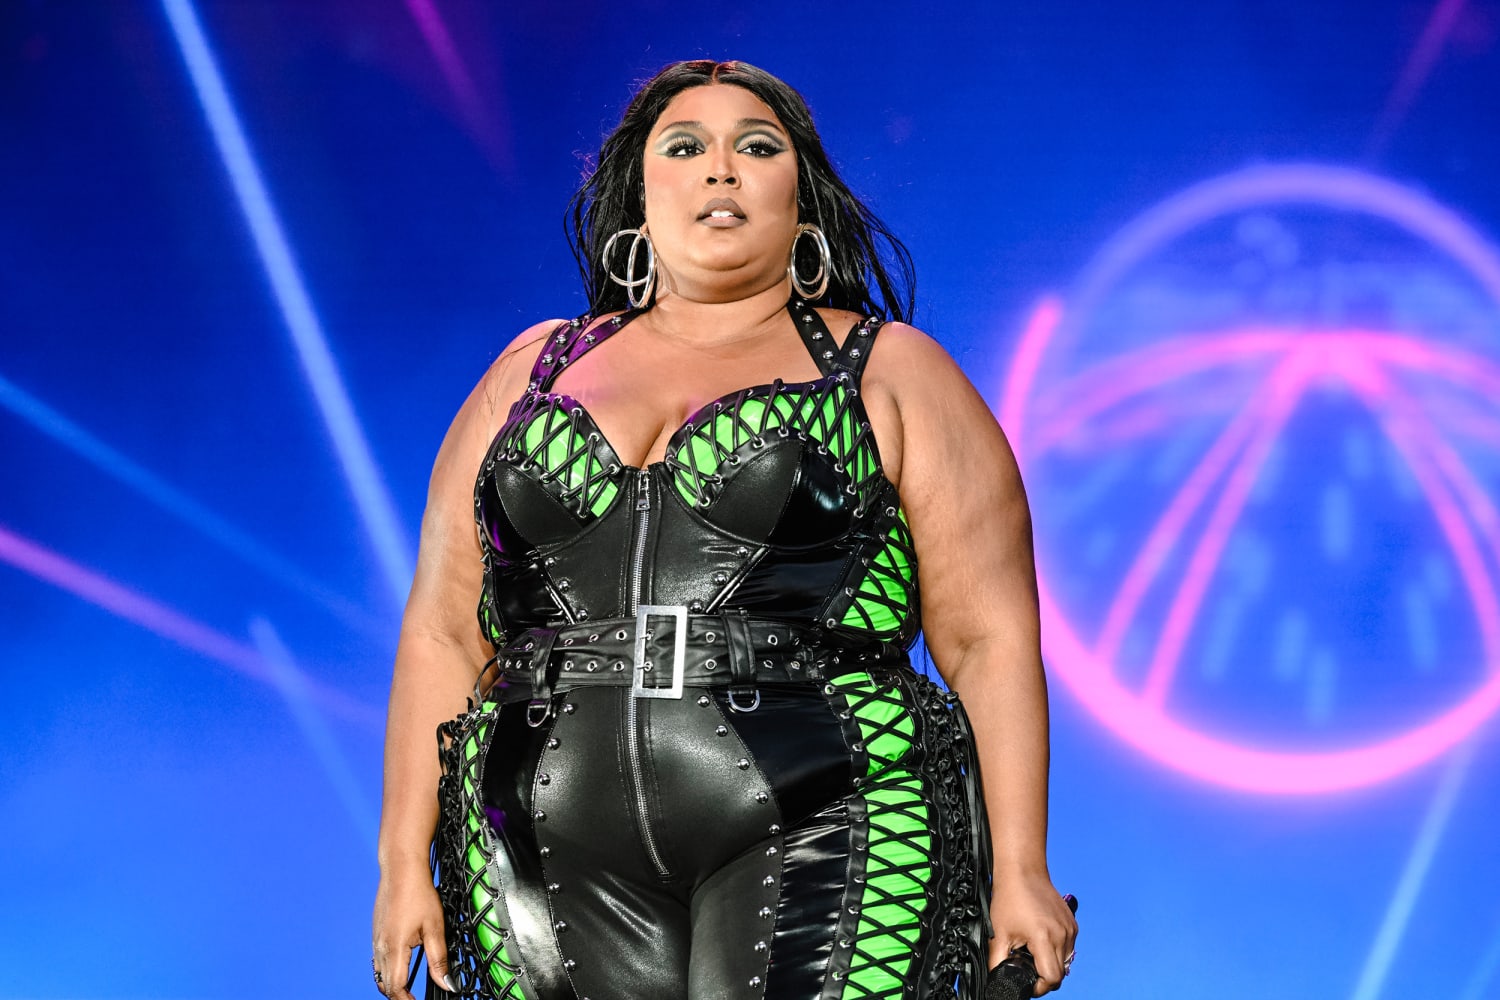 Lizzo fans say they are disappointed after lawsuit alleges the singer created a hostile work environment pic